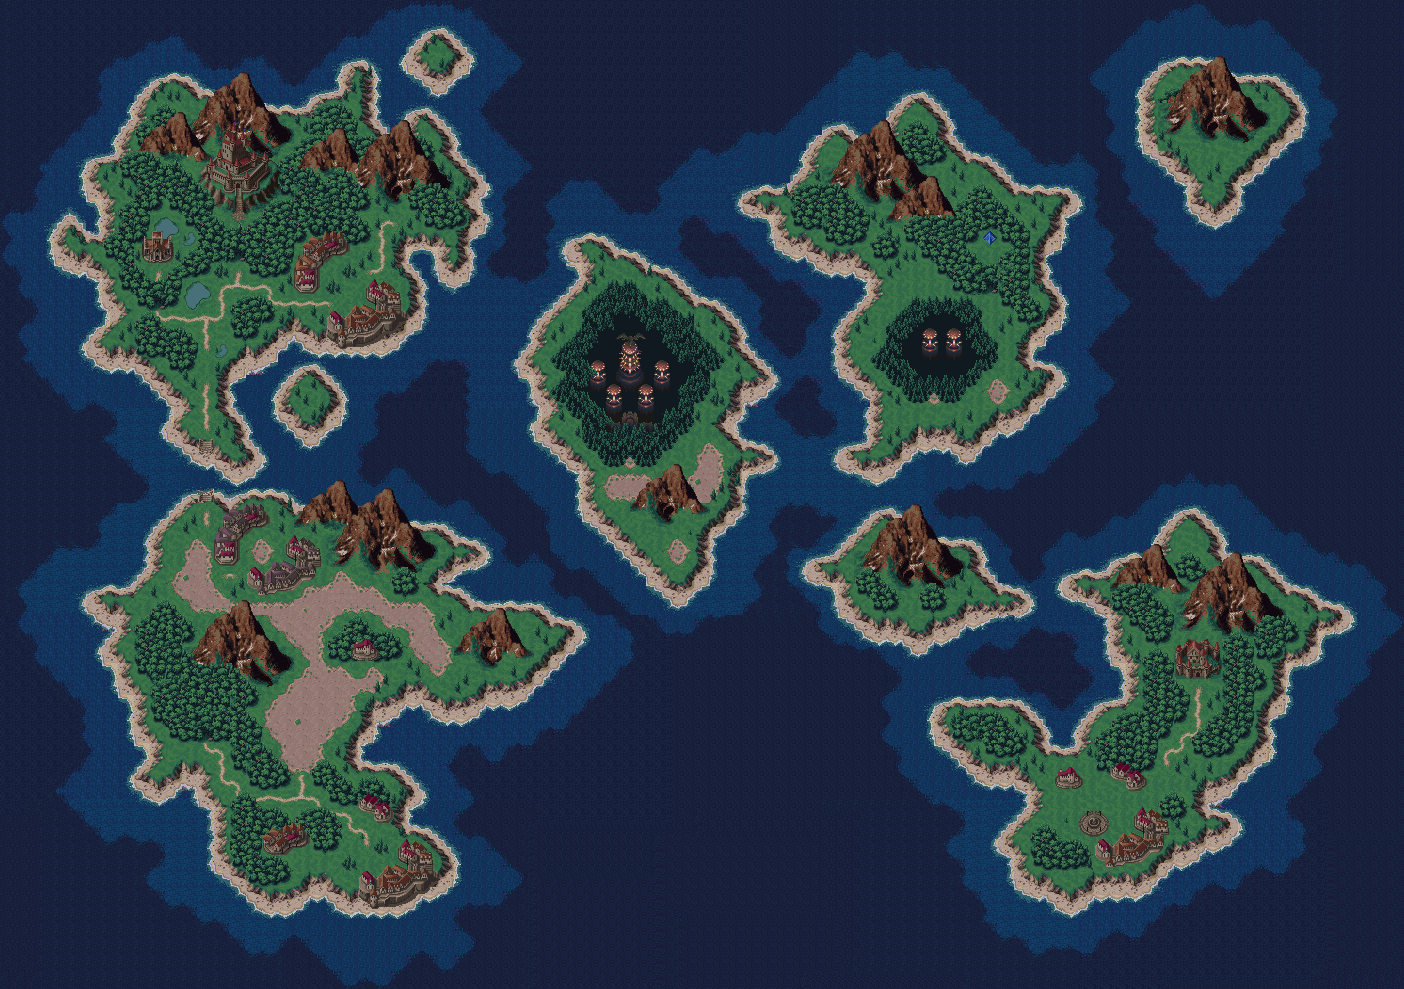 Chrono Trigger (Prototype) - Middle Ages Map